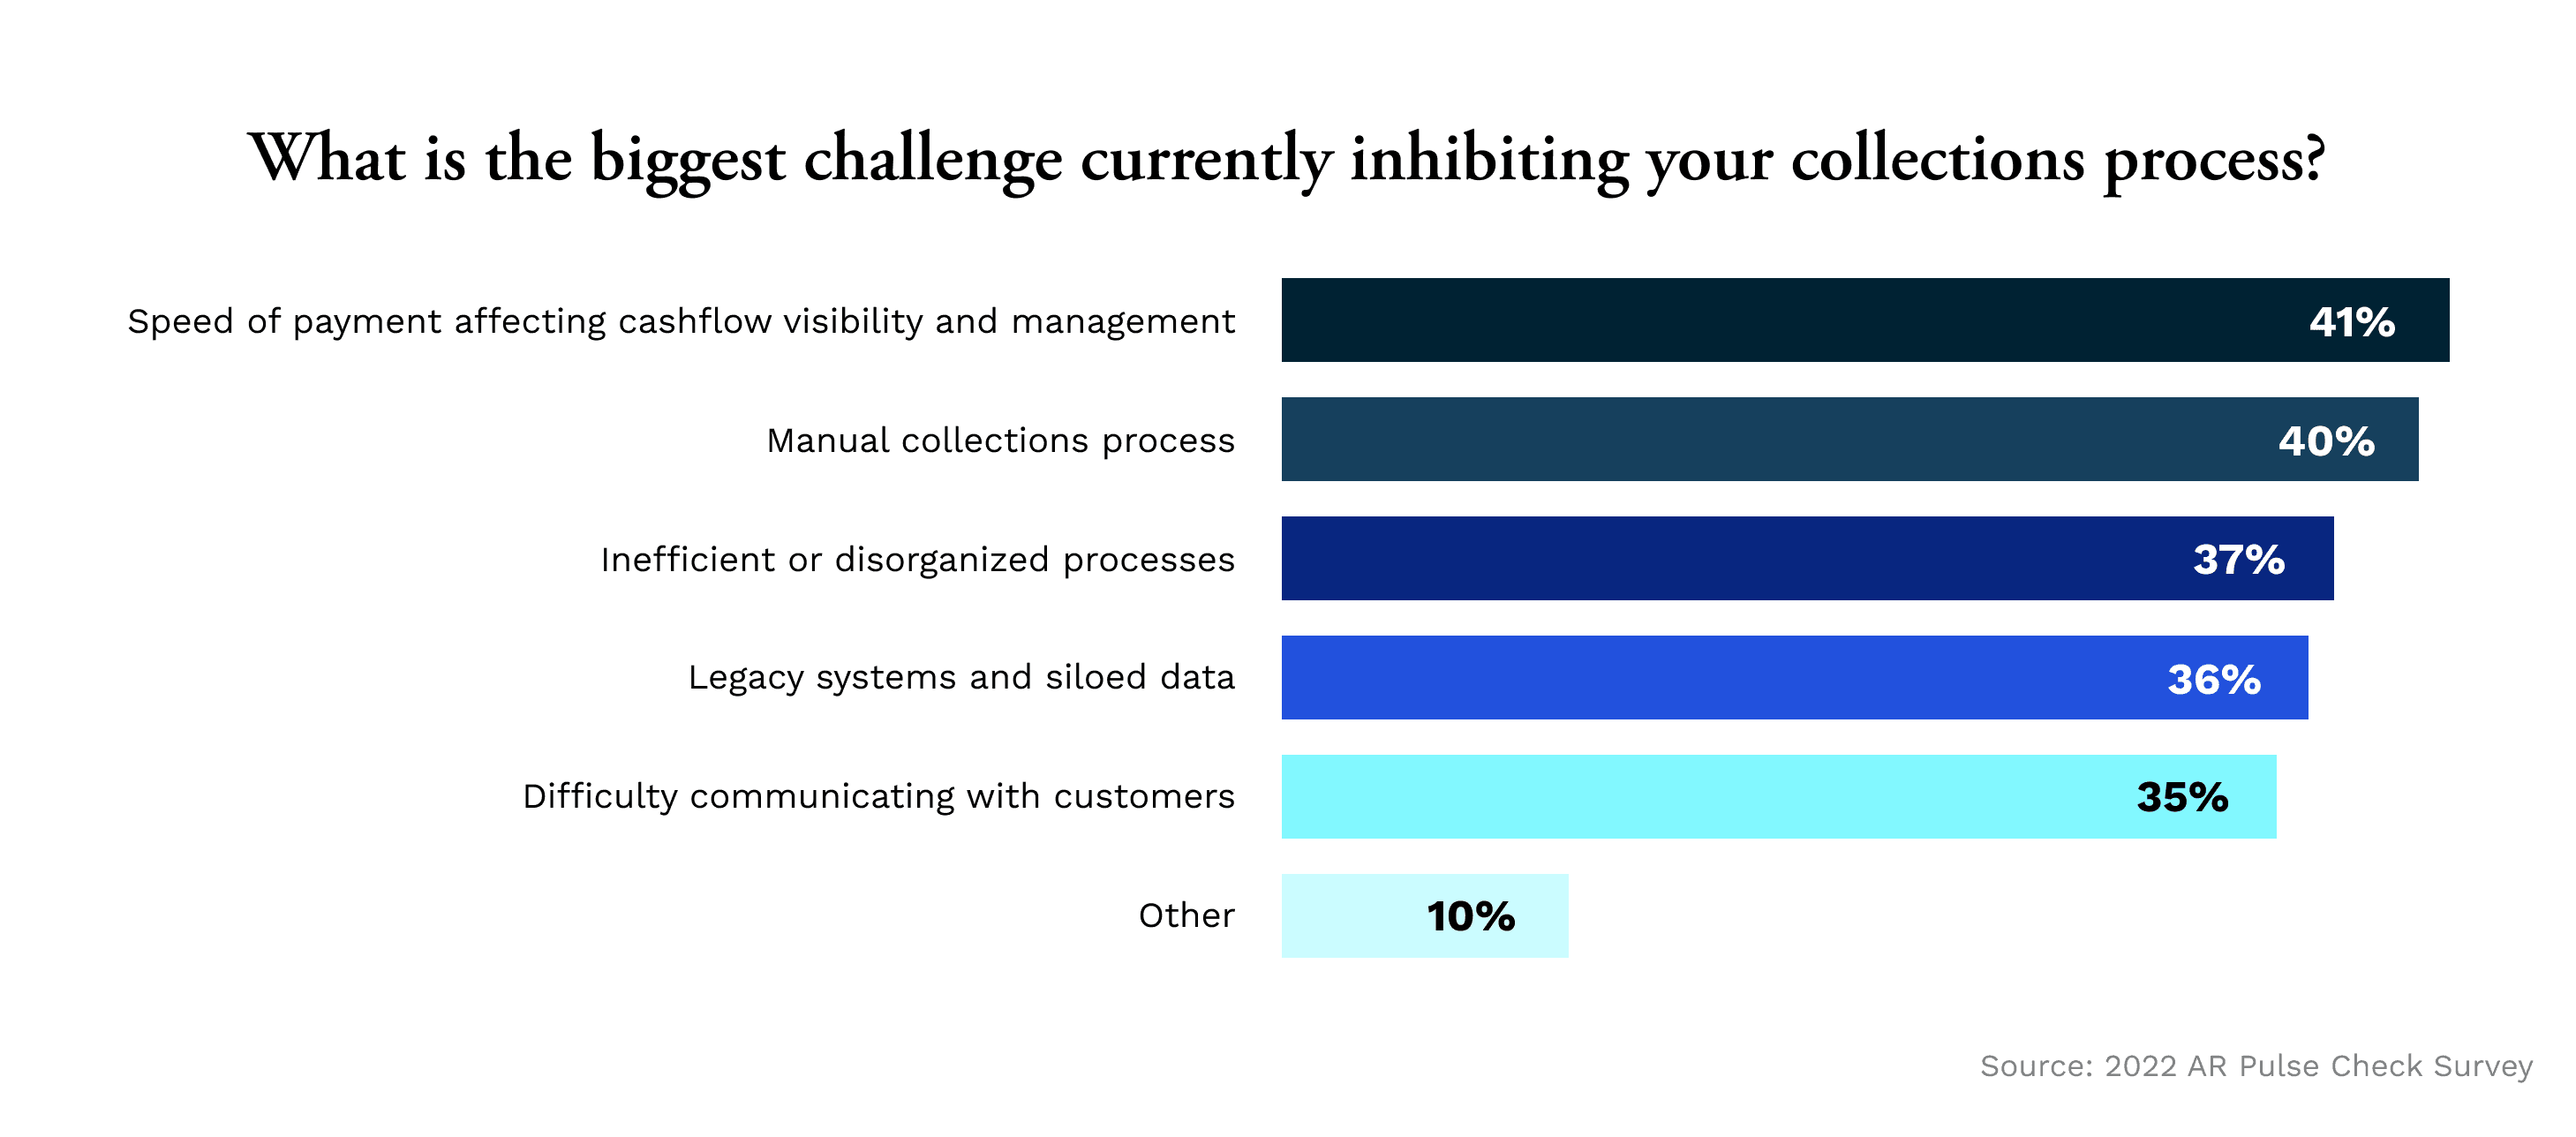 Biggest challenges currently inhibiting collections processes